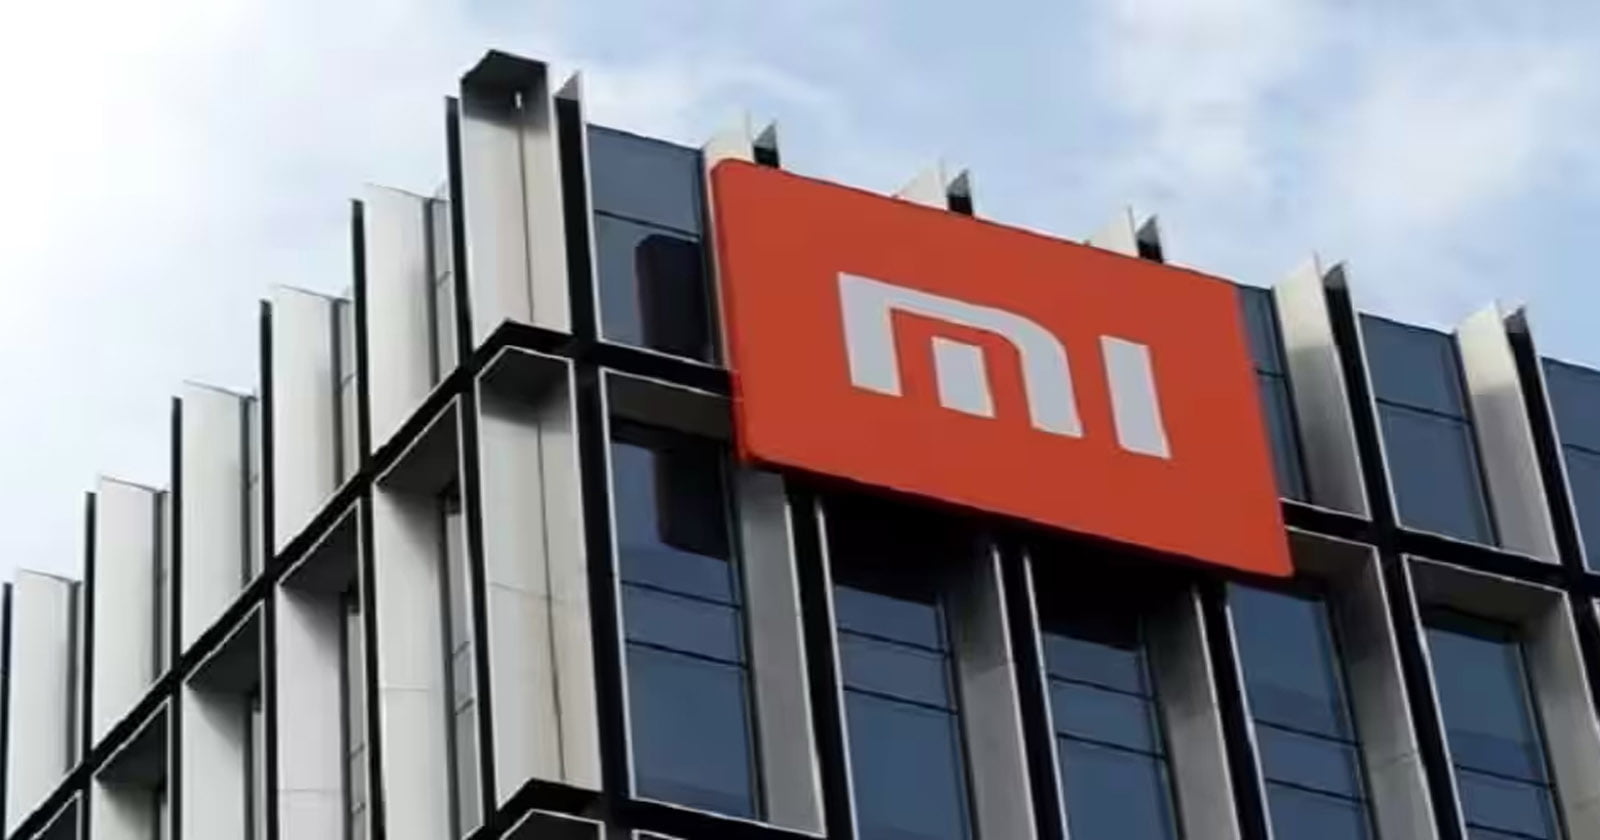 Relief to Xiaomi - LCD Panels and Parts of LCD Panels Classified under Same Chapter Heading for filing - Bill of Entry for Import - TAXSCANRelief to Xiaomi - LCD Panels and Parts of LCD Panels Classified under Same Chapter Heading for filing - Bill of Entry for Import - TAXSCAN